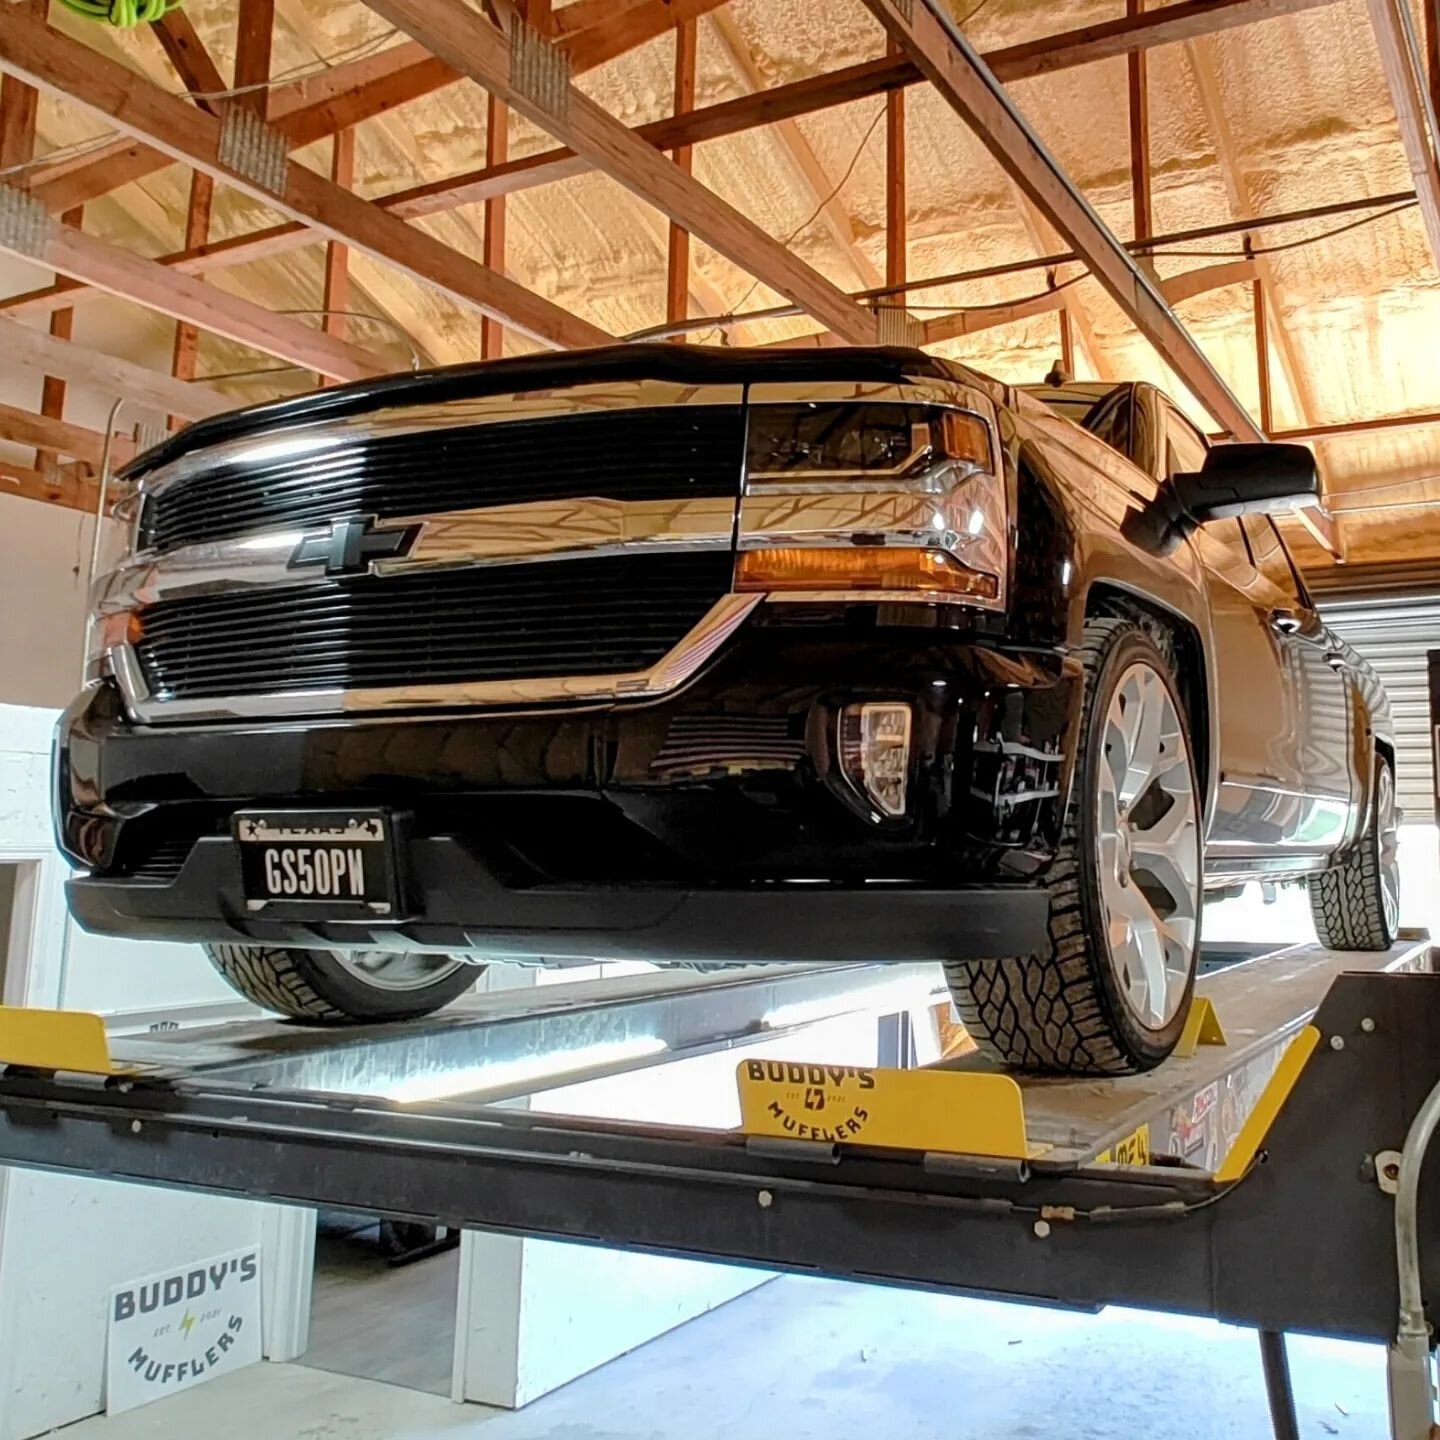 On the lift today we had a #supercharged #chevrolet #chevy #silverado with a pair of #vibrantperformance super quiet resonators and #flowmaster #delta50 mufflers that were still too loud with the power this beast is putting out. So we stepped up to t